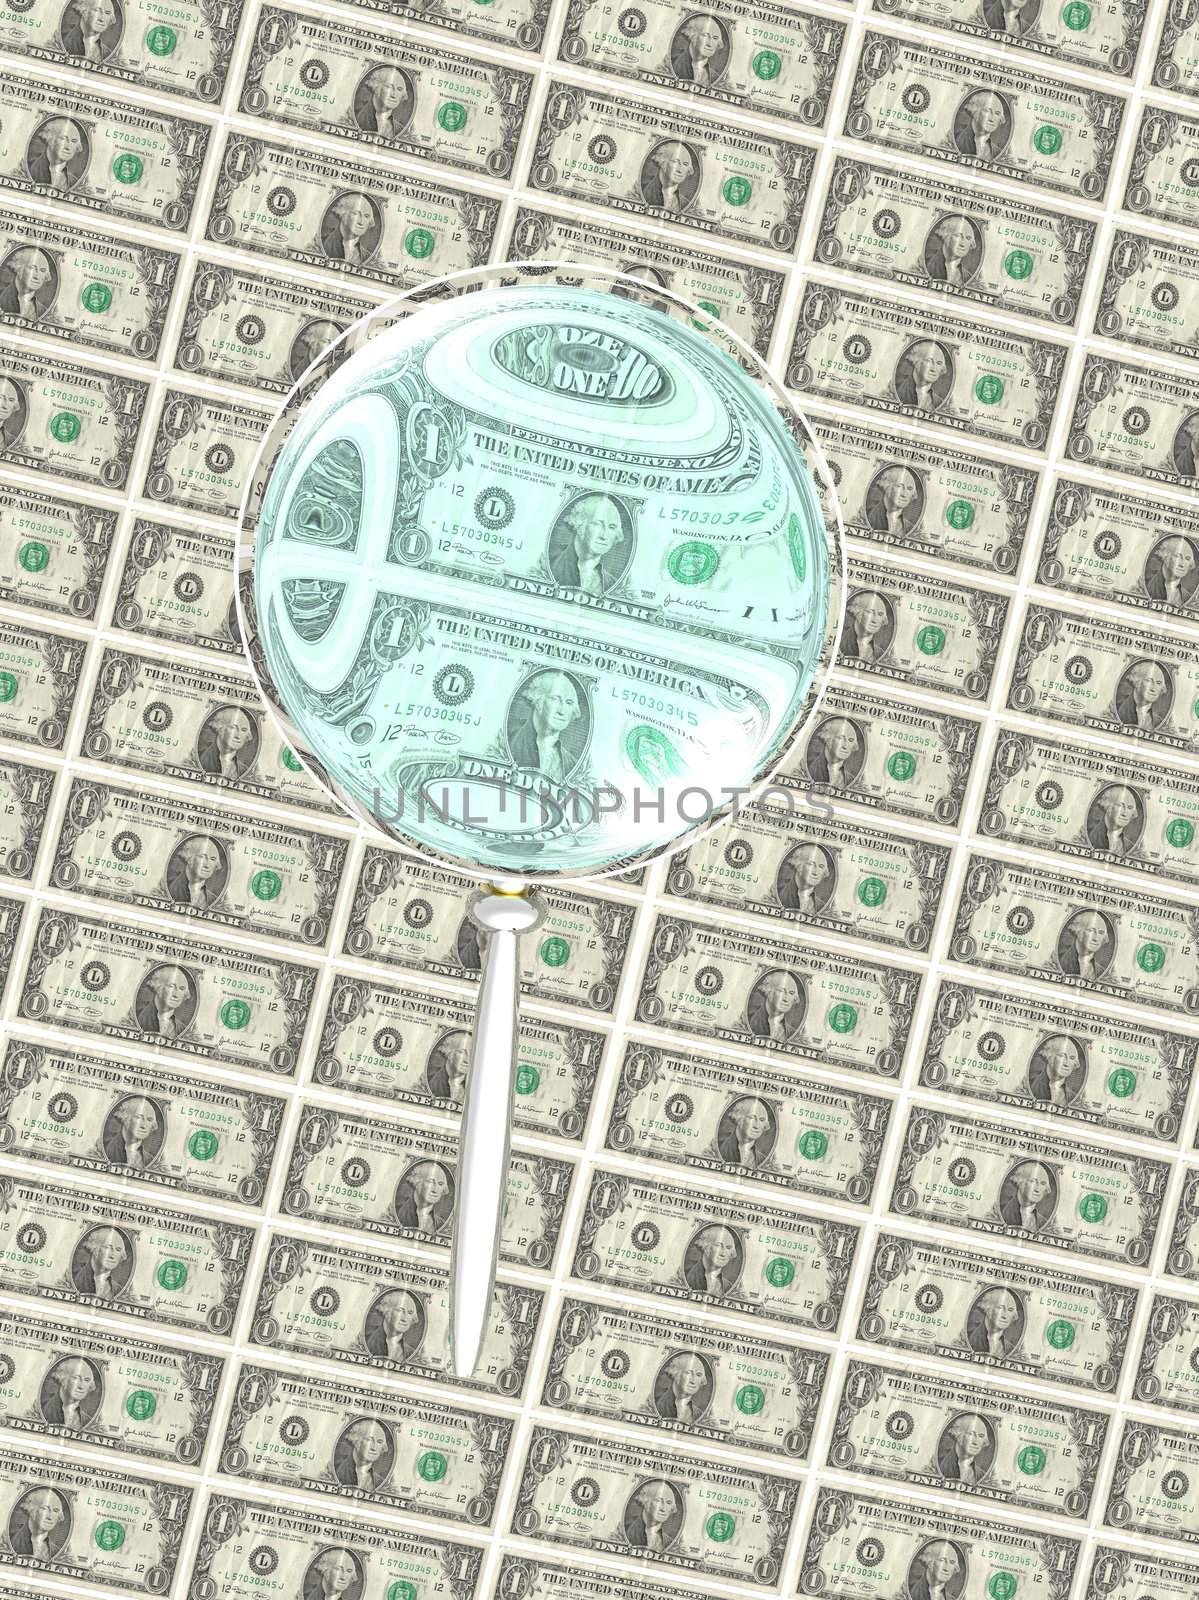 A computer generate image of a magnifying glass taking a close look at the US currency.